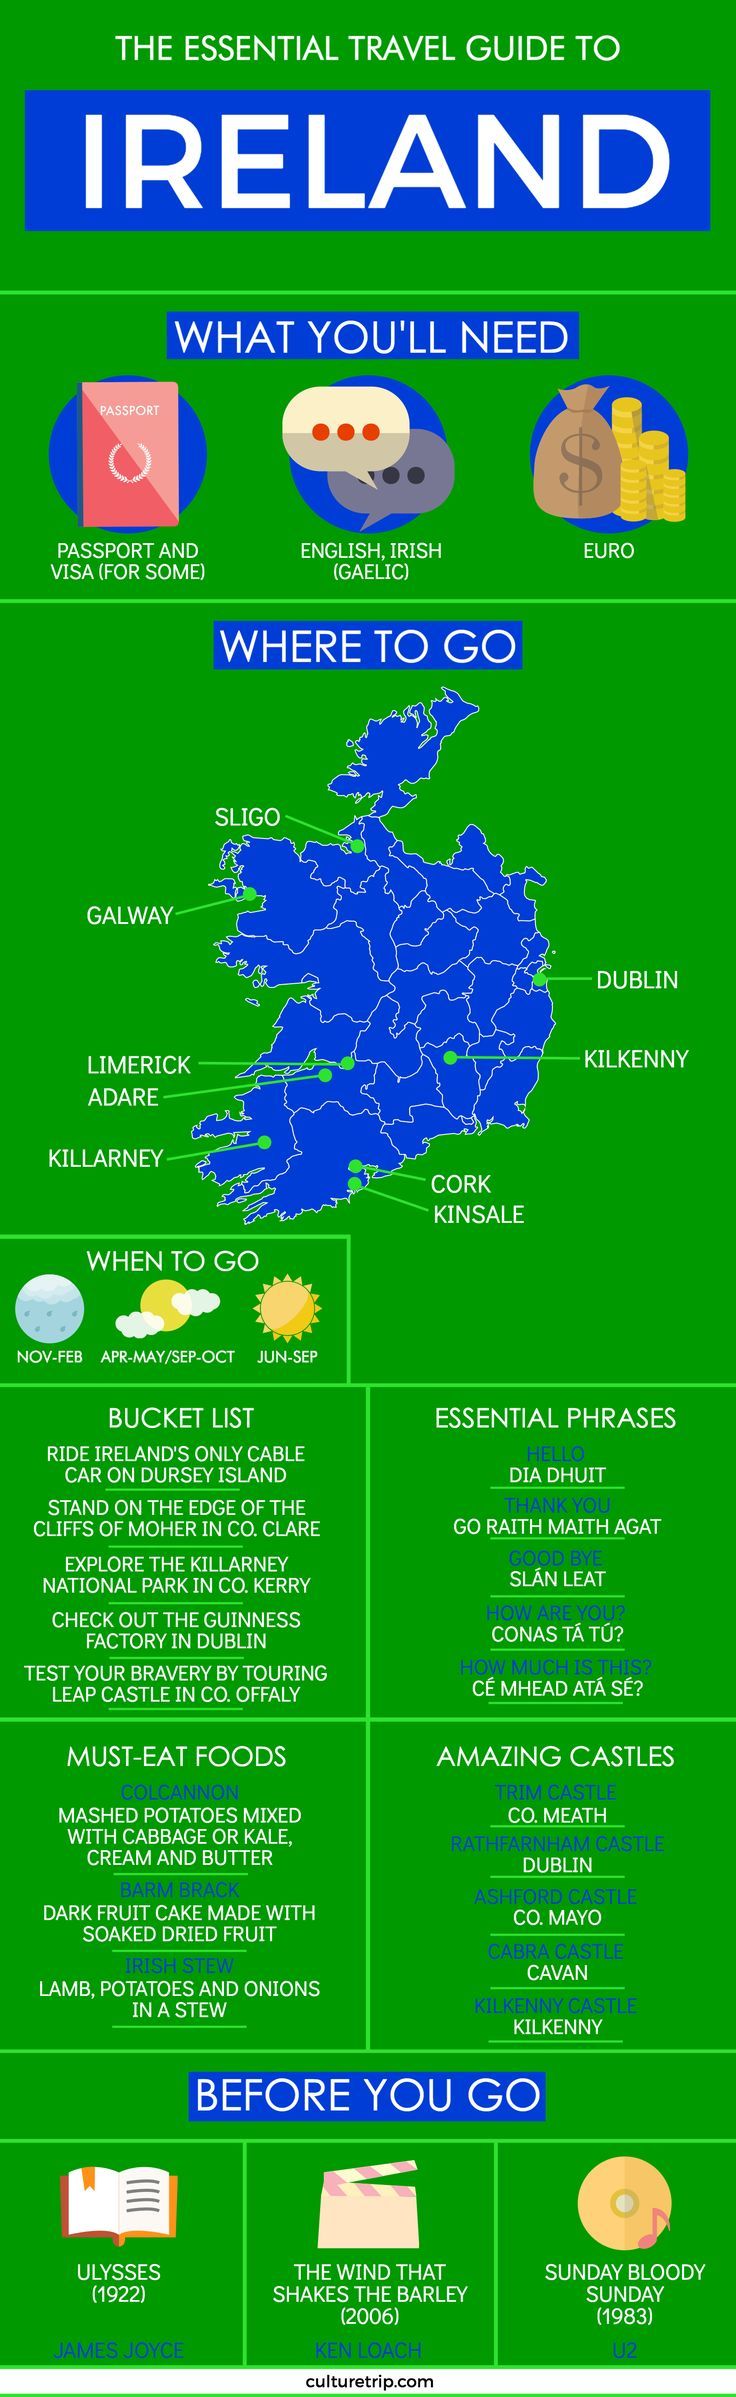 Your Essential Travel Guide to Ireland (Infographic)